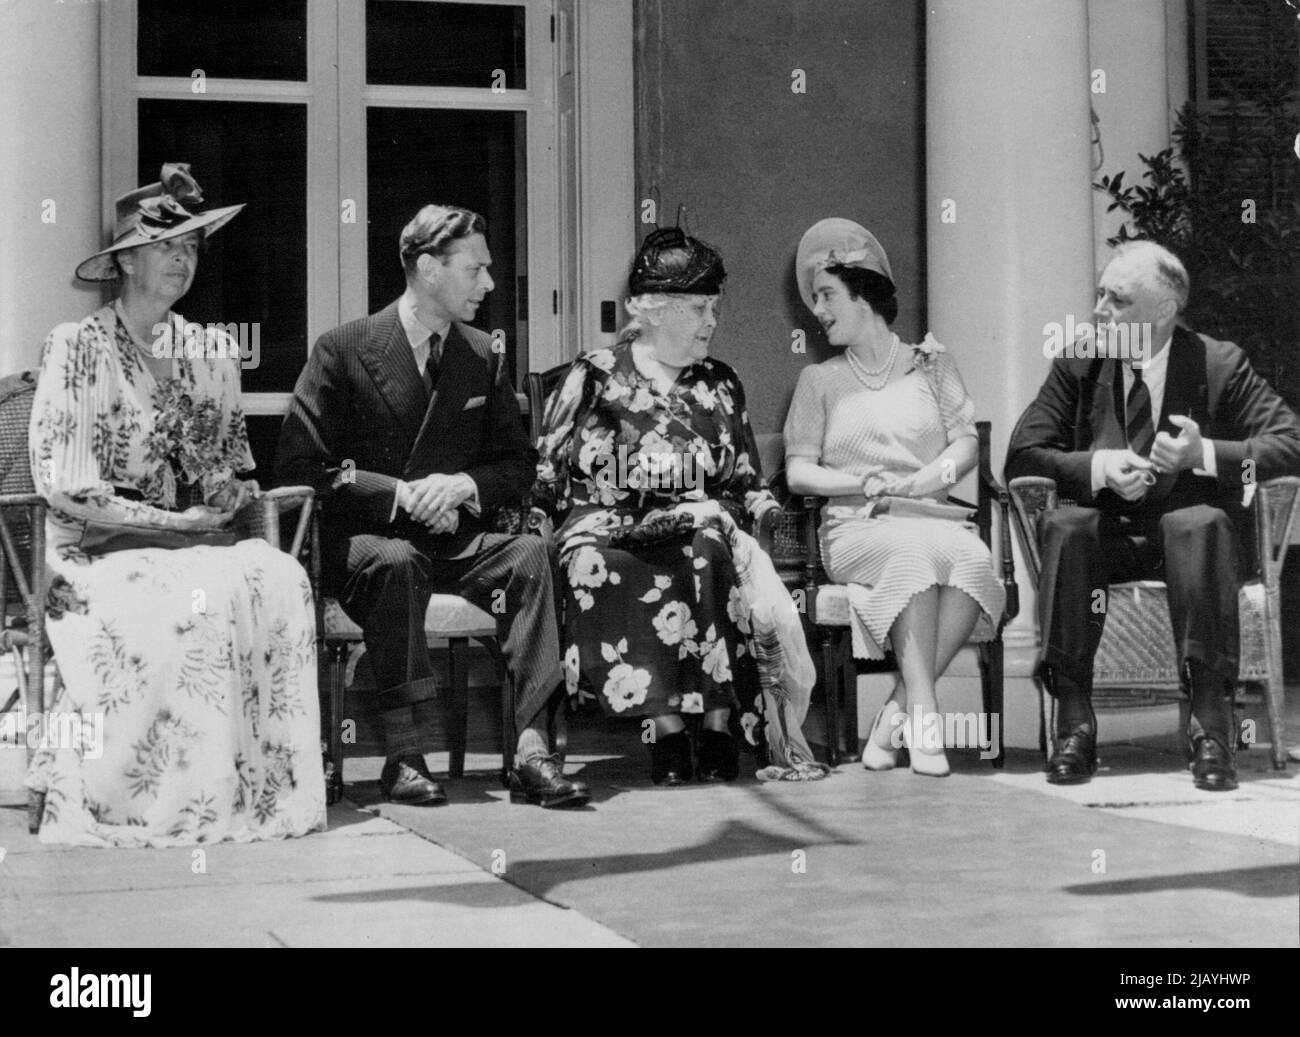 Royal Conversation Piece -- Left to Right: Mrs. Franklin D. Roosevelt, wife of the President; the King, the President's Mother, Mrs. Sarah Delano Roosevelt; the Queen, and the President. Four Members of the first families of Great Britain and the United States were caught by the camera in Antimated conversation when King George and Queen Elizabeth sat with the Roosevelts on the front porch of the Roosevelt family home at Hyde Park, N.Y., June 11. November 6, 1939. (Photo by Associated Press Photo). Stock Photo